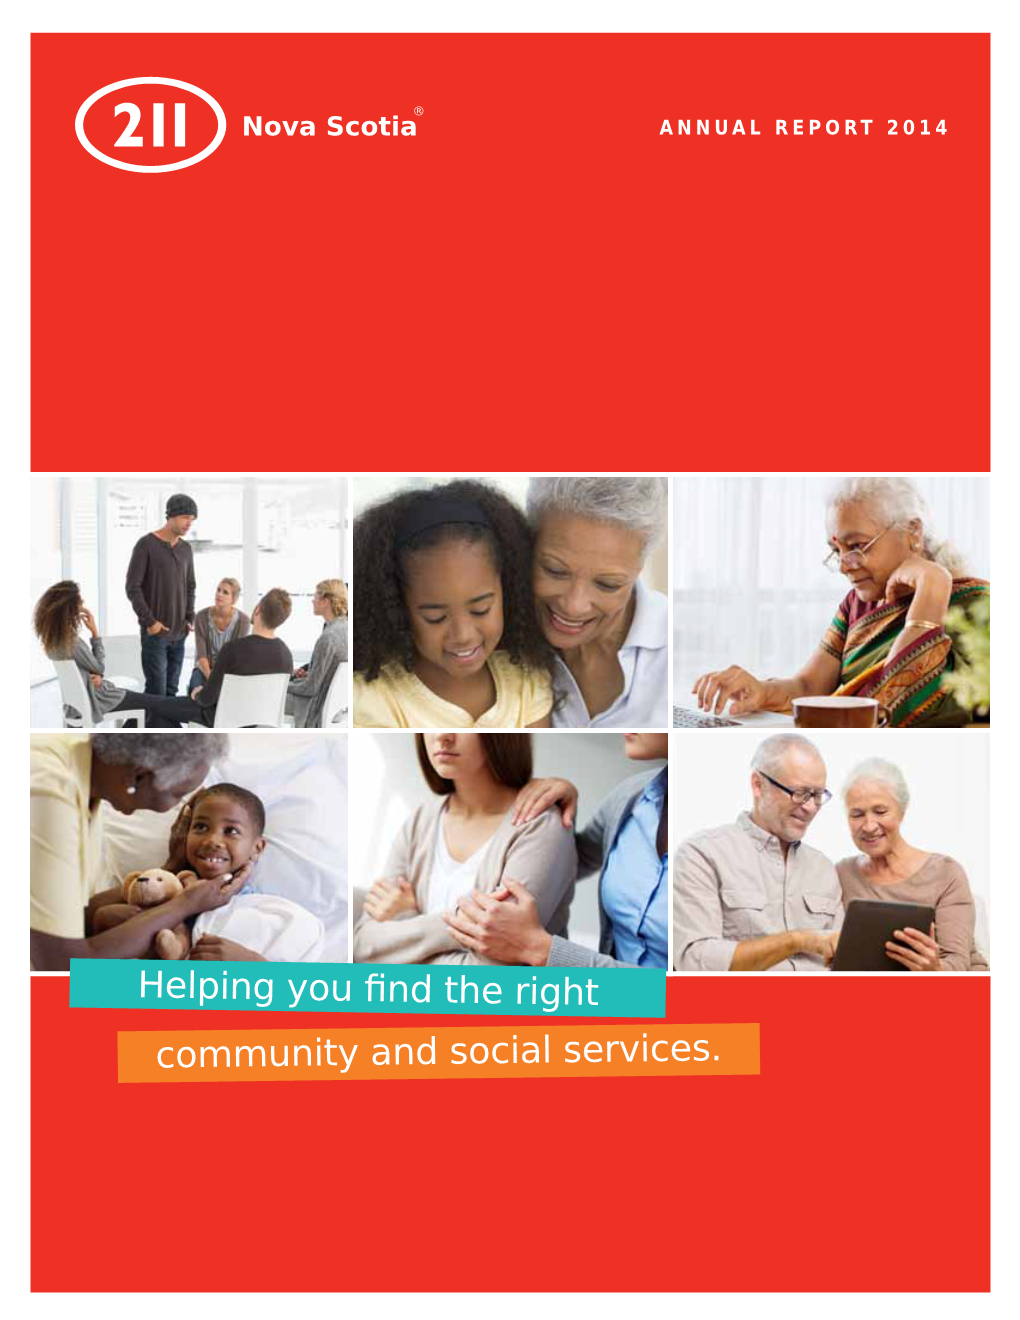 Helping You Find the Right Community and Social Services. Joint Message from The